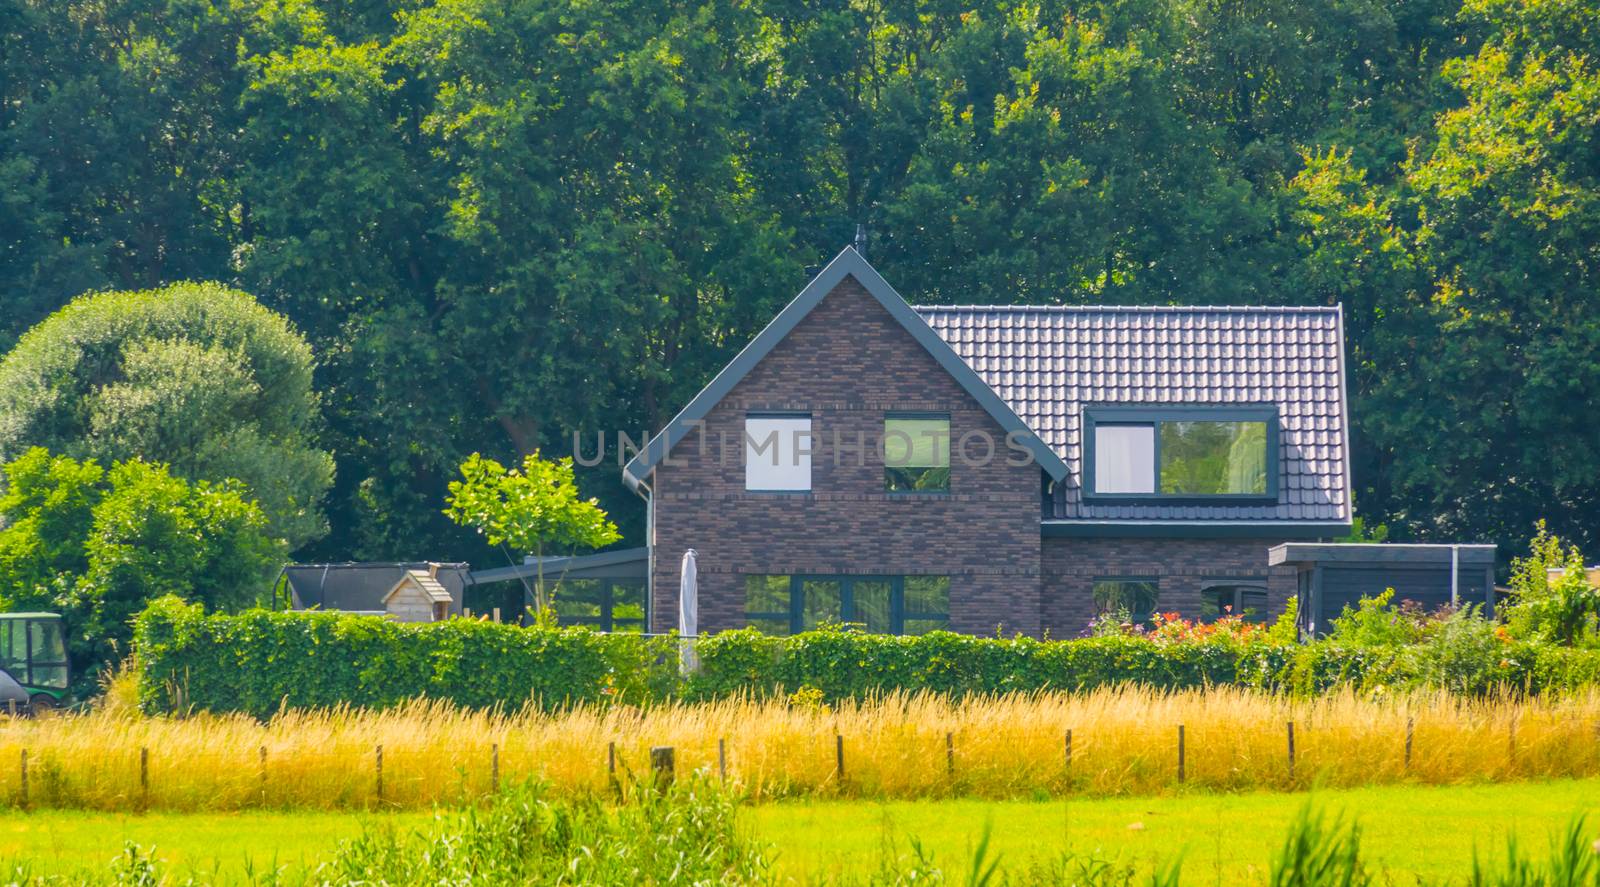 Fields with a farm house, Country side scenery of Bergen op zoom, The Netherlands